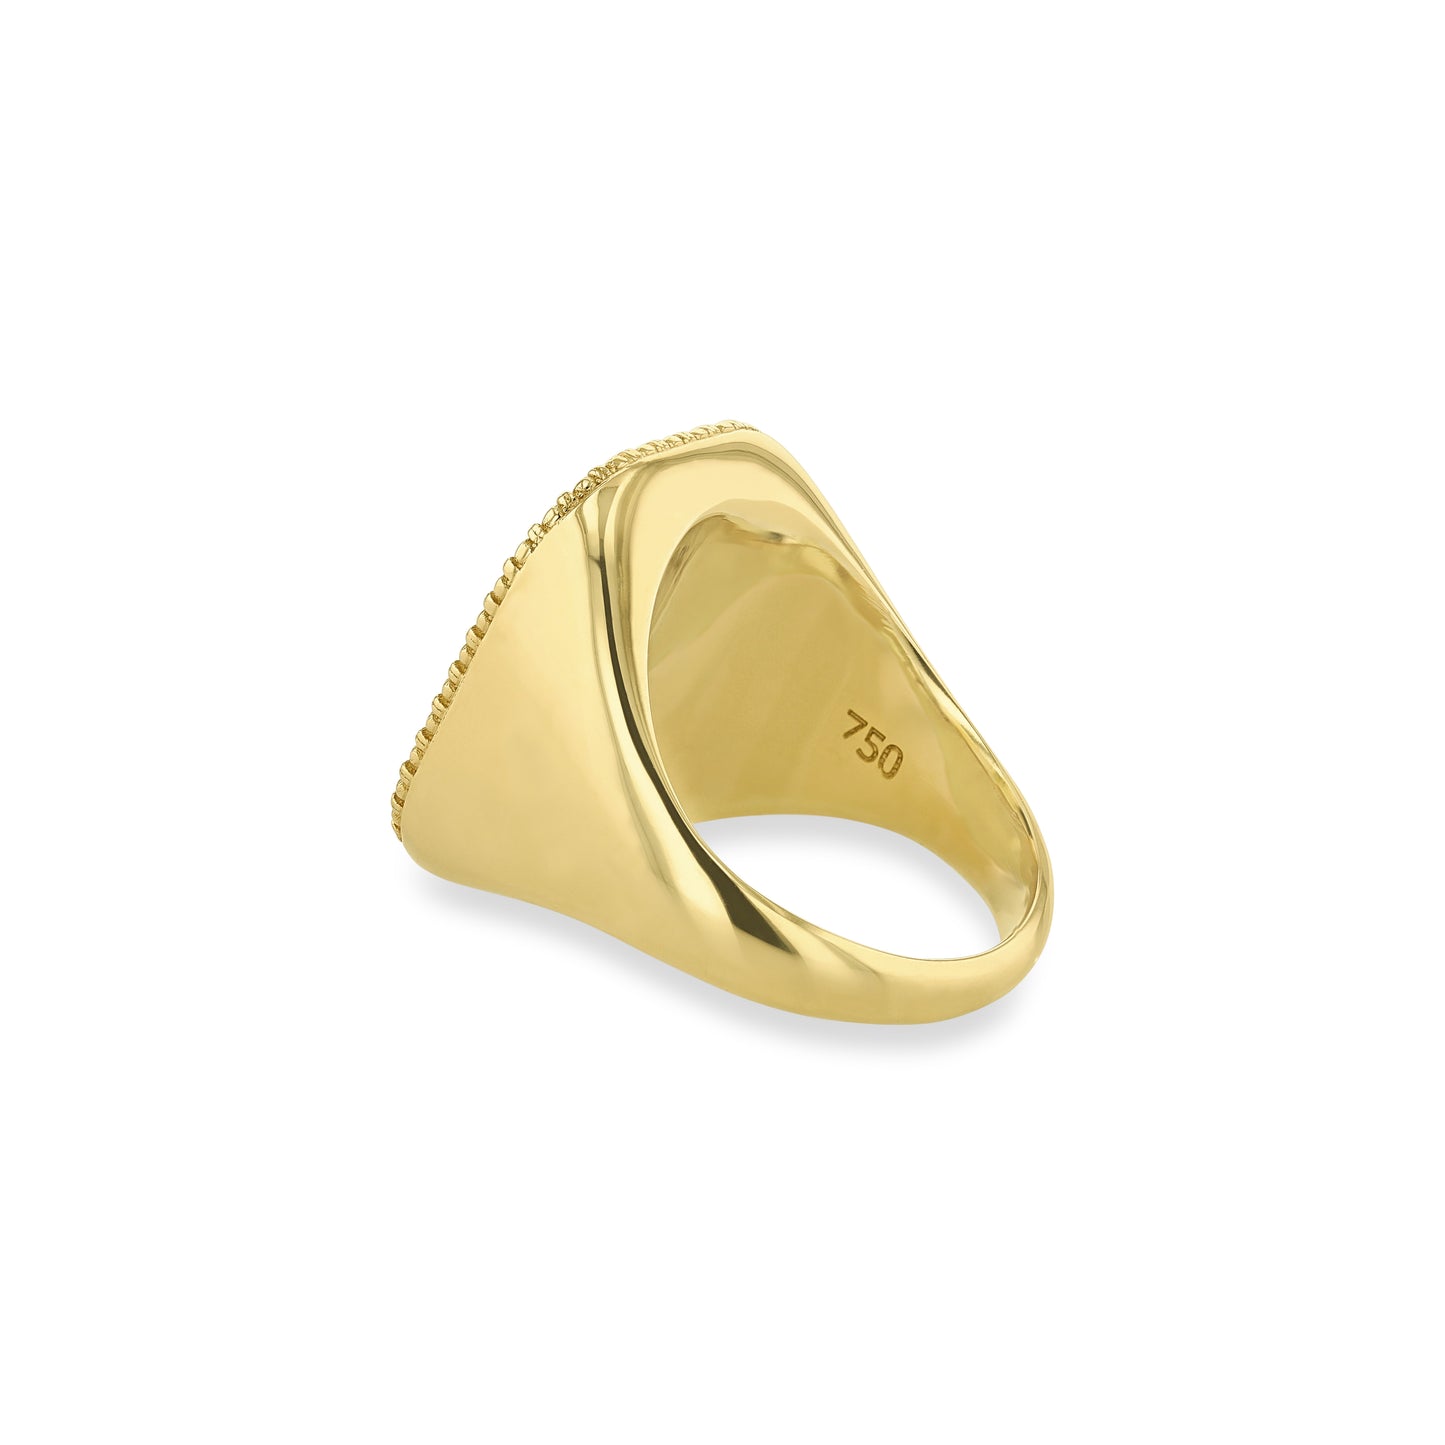 Palm Tree Ring in Yellow Gold